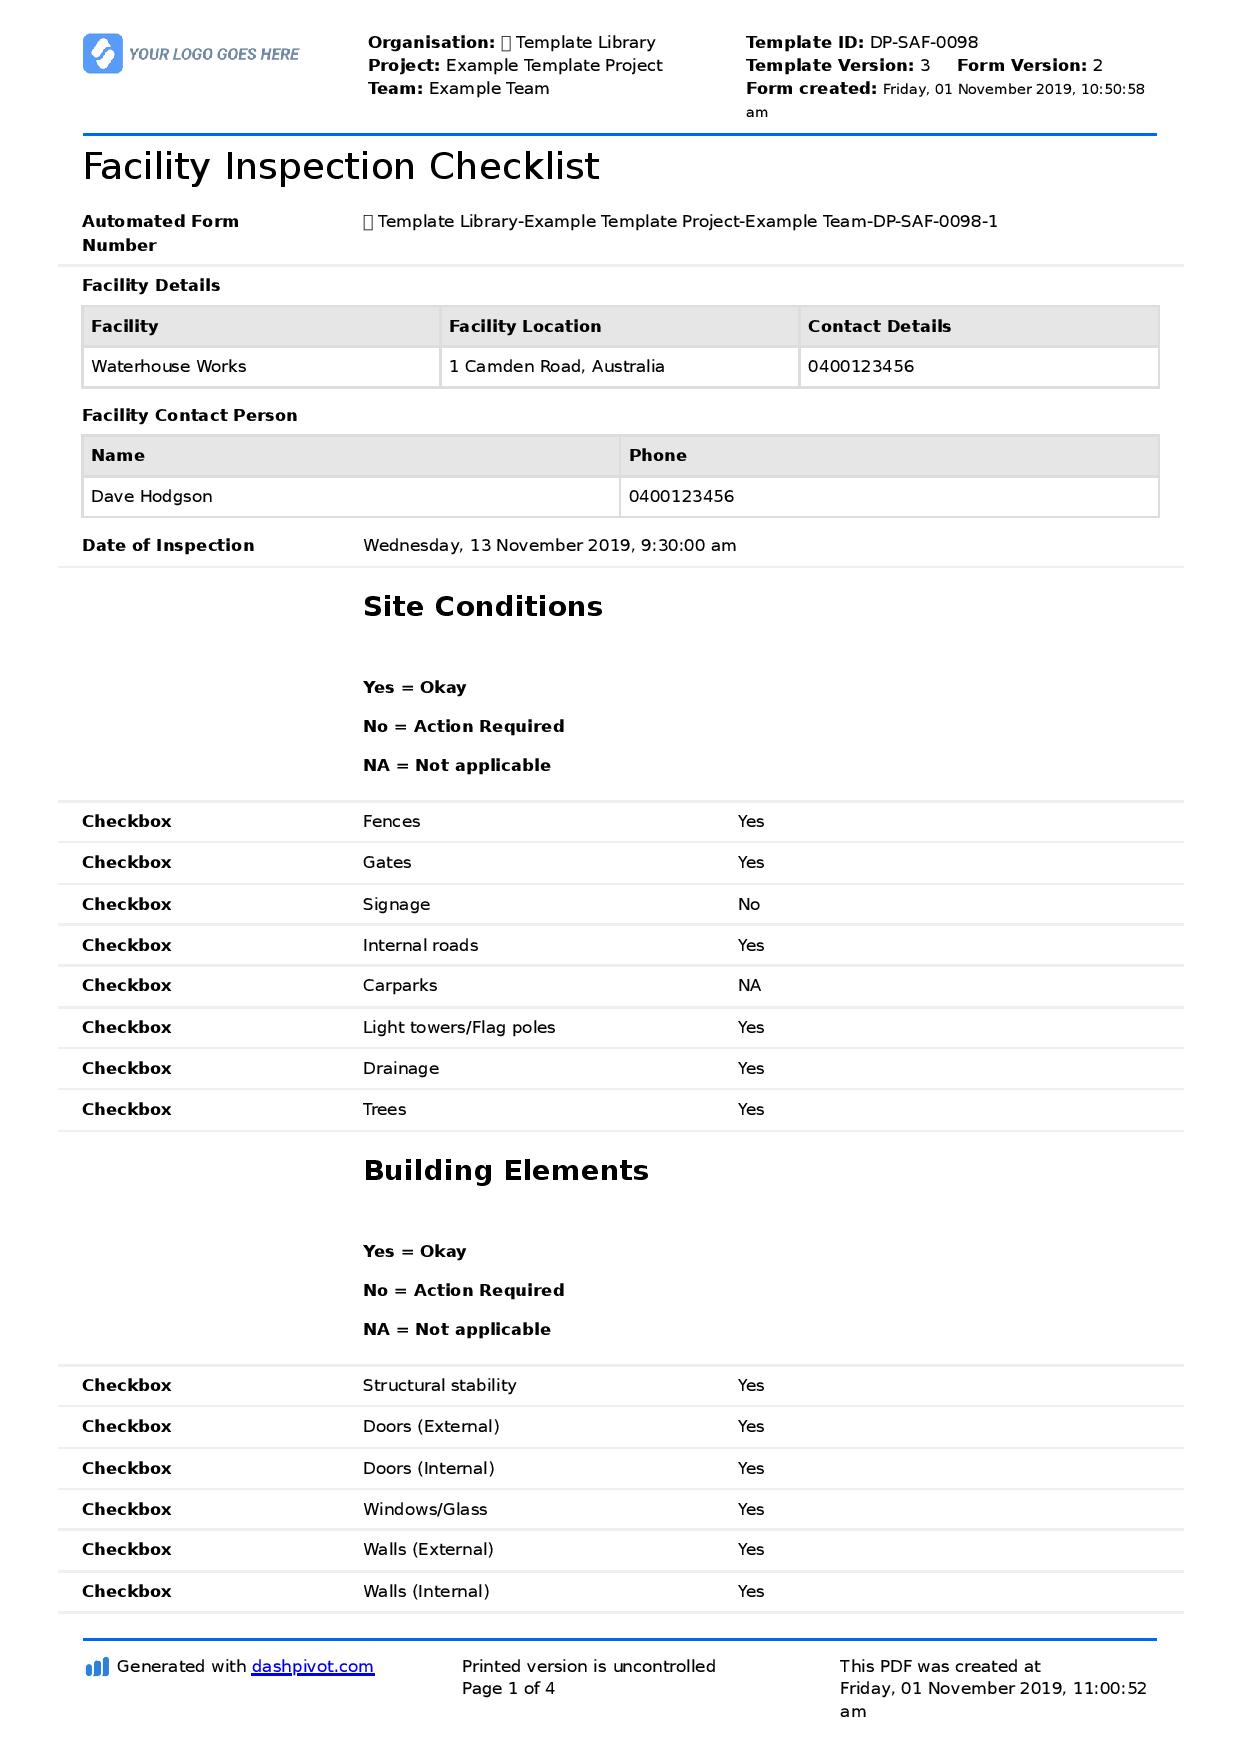 Facility Inspection Checklist template (Better than excel, PDF forms) In Daily Inspection Report Template